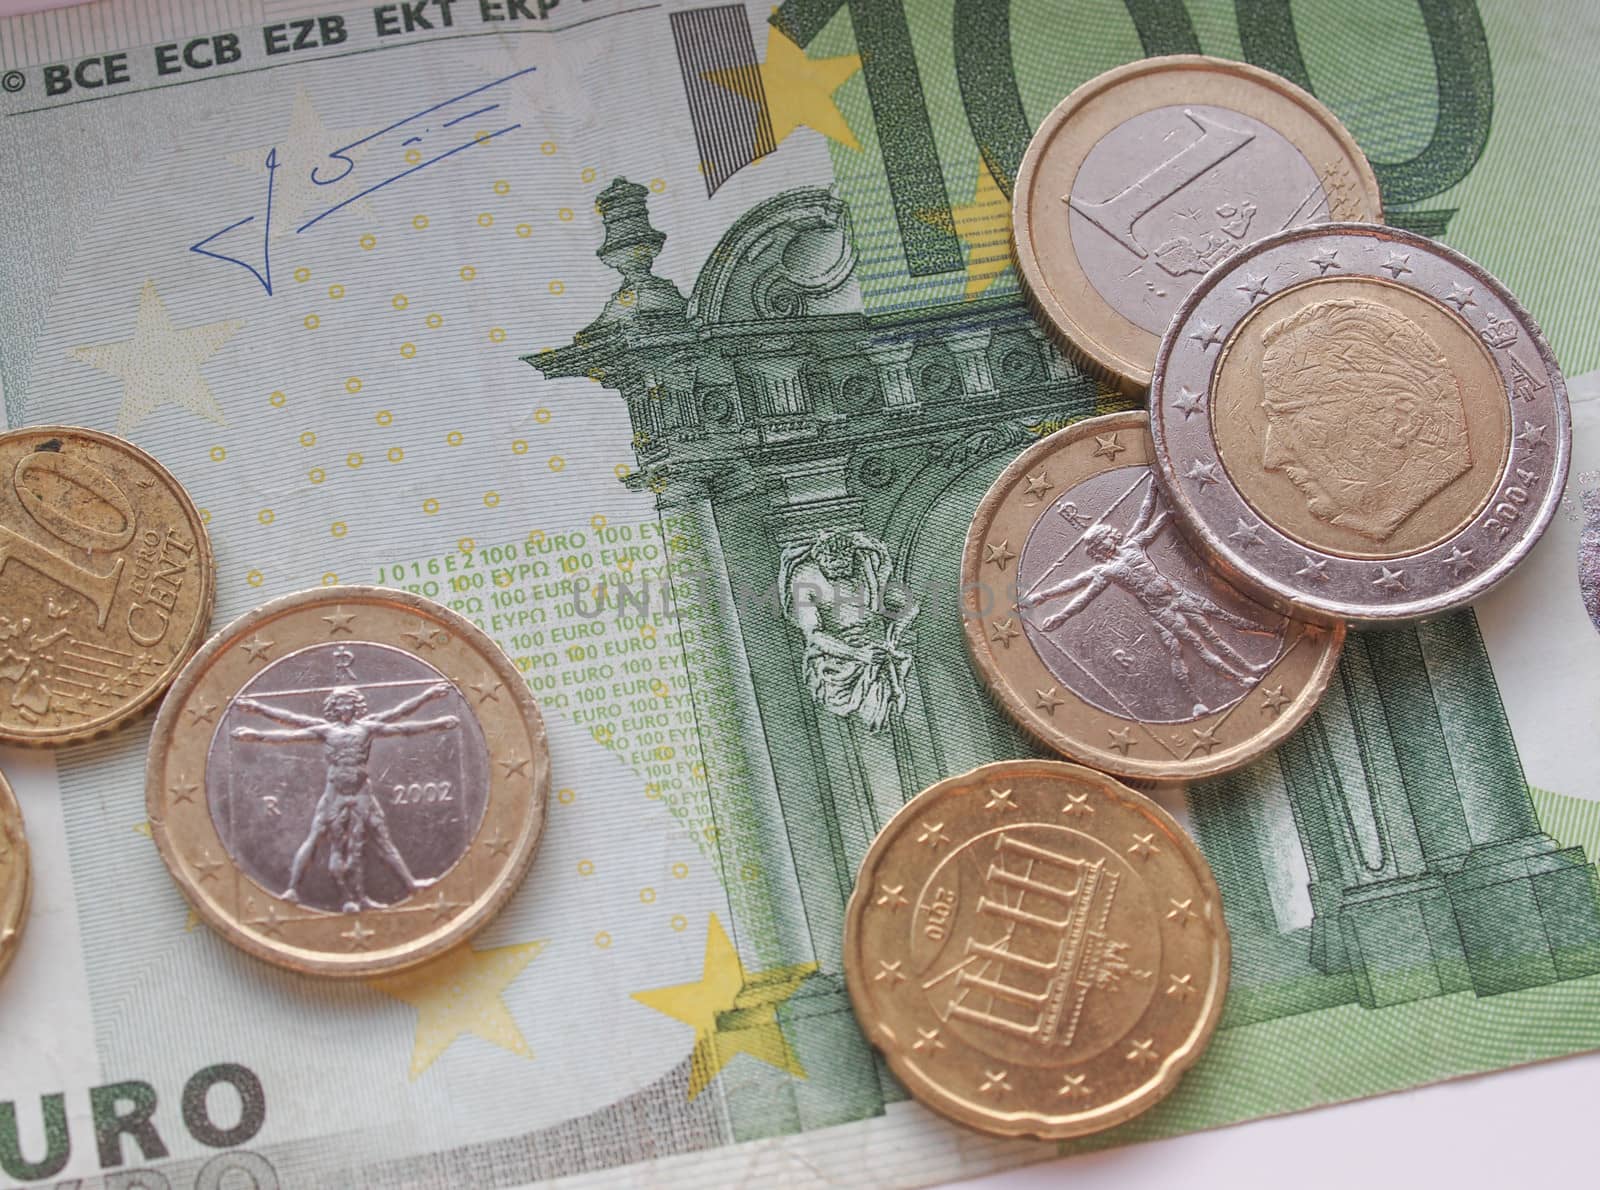 Euro notes and coins by paolo77